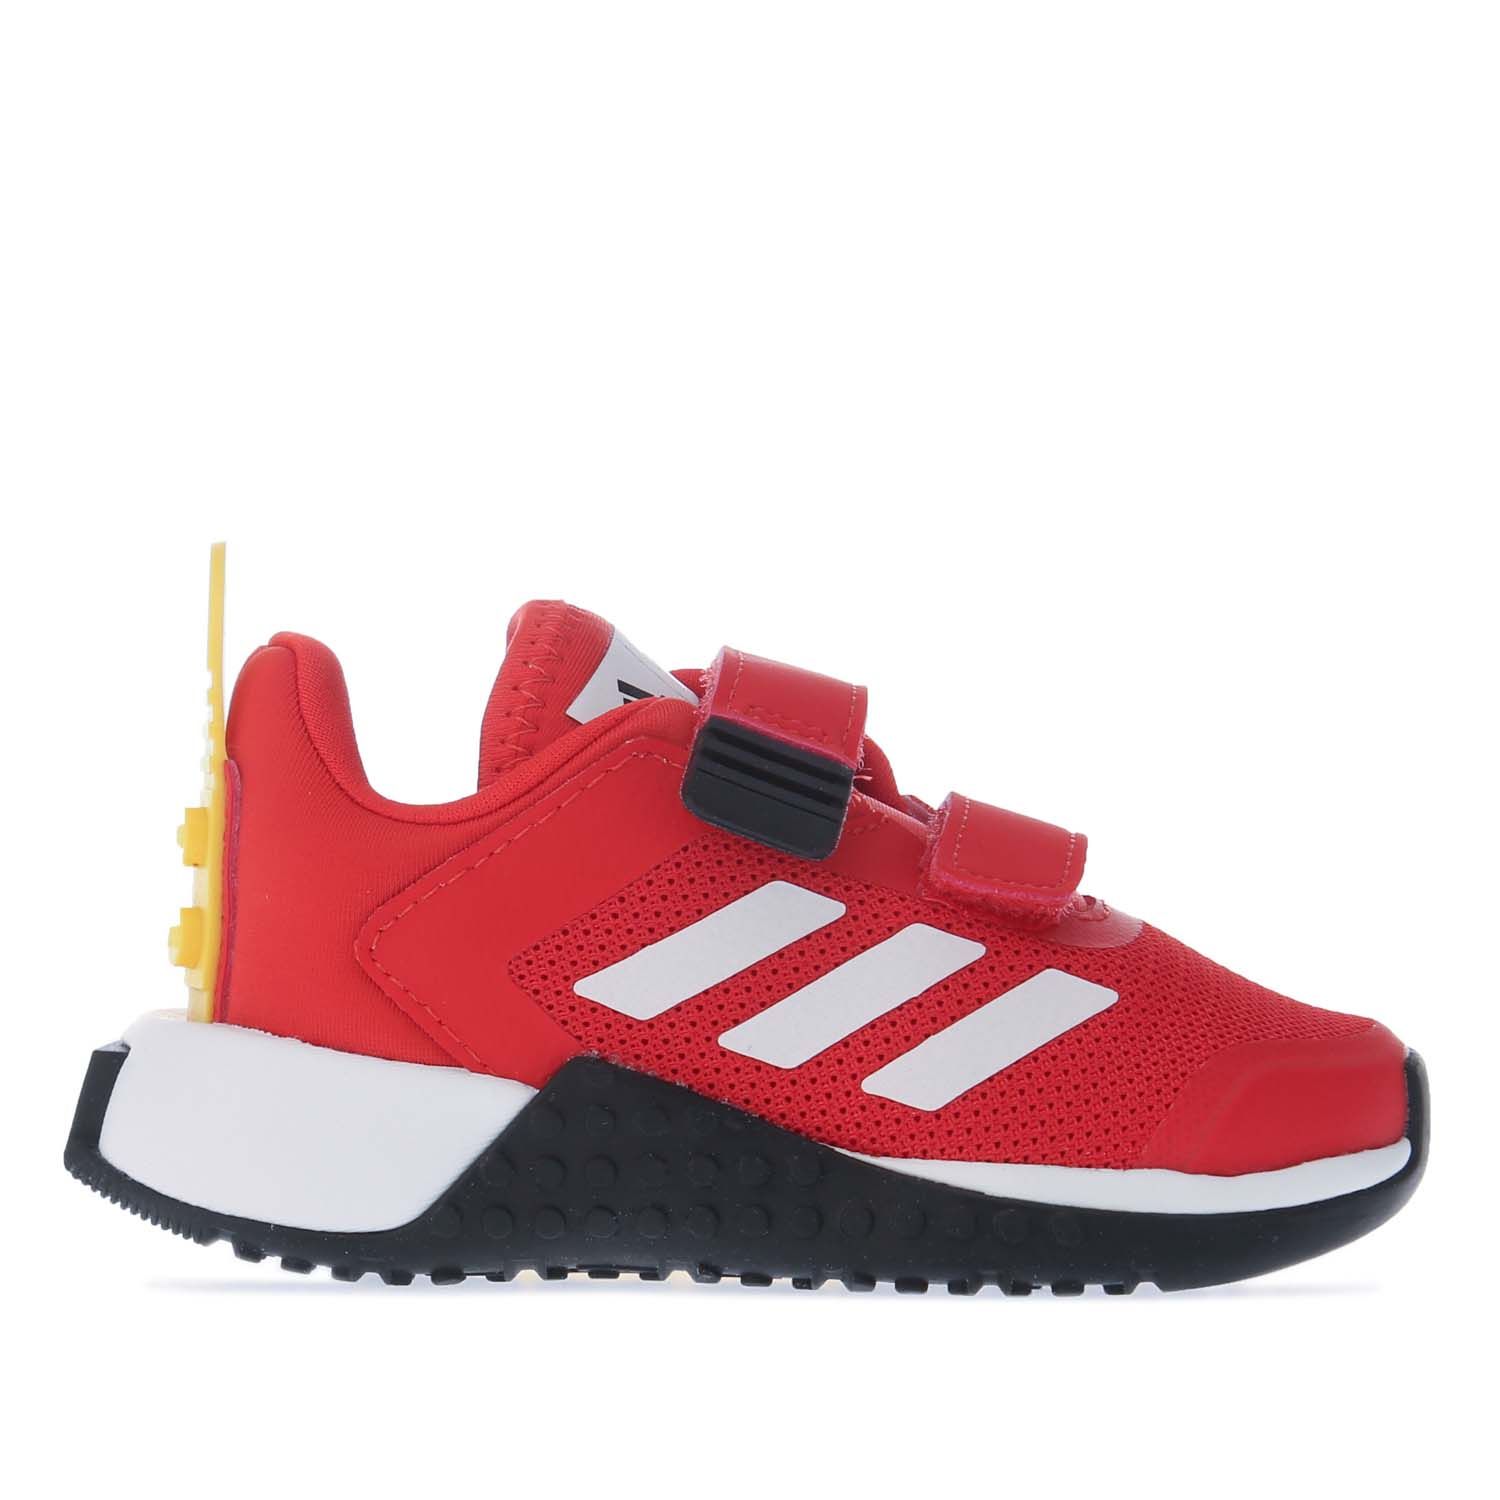 Pantalones Penélope brindis red white adidas Infant Lego Sport Trainers - Get The Label